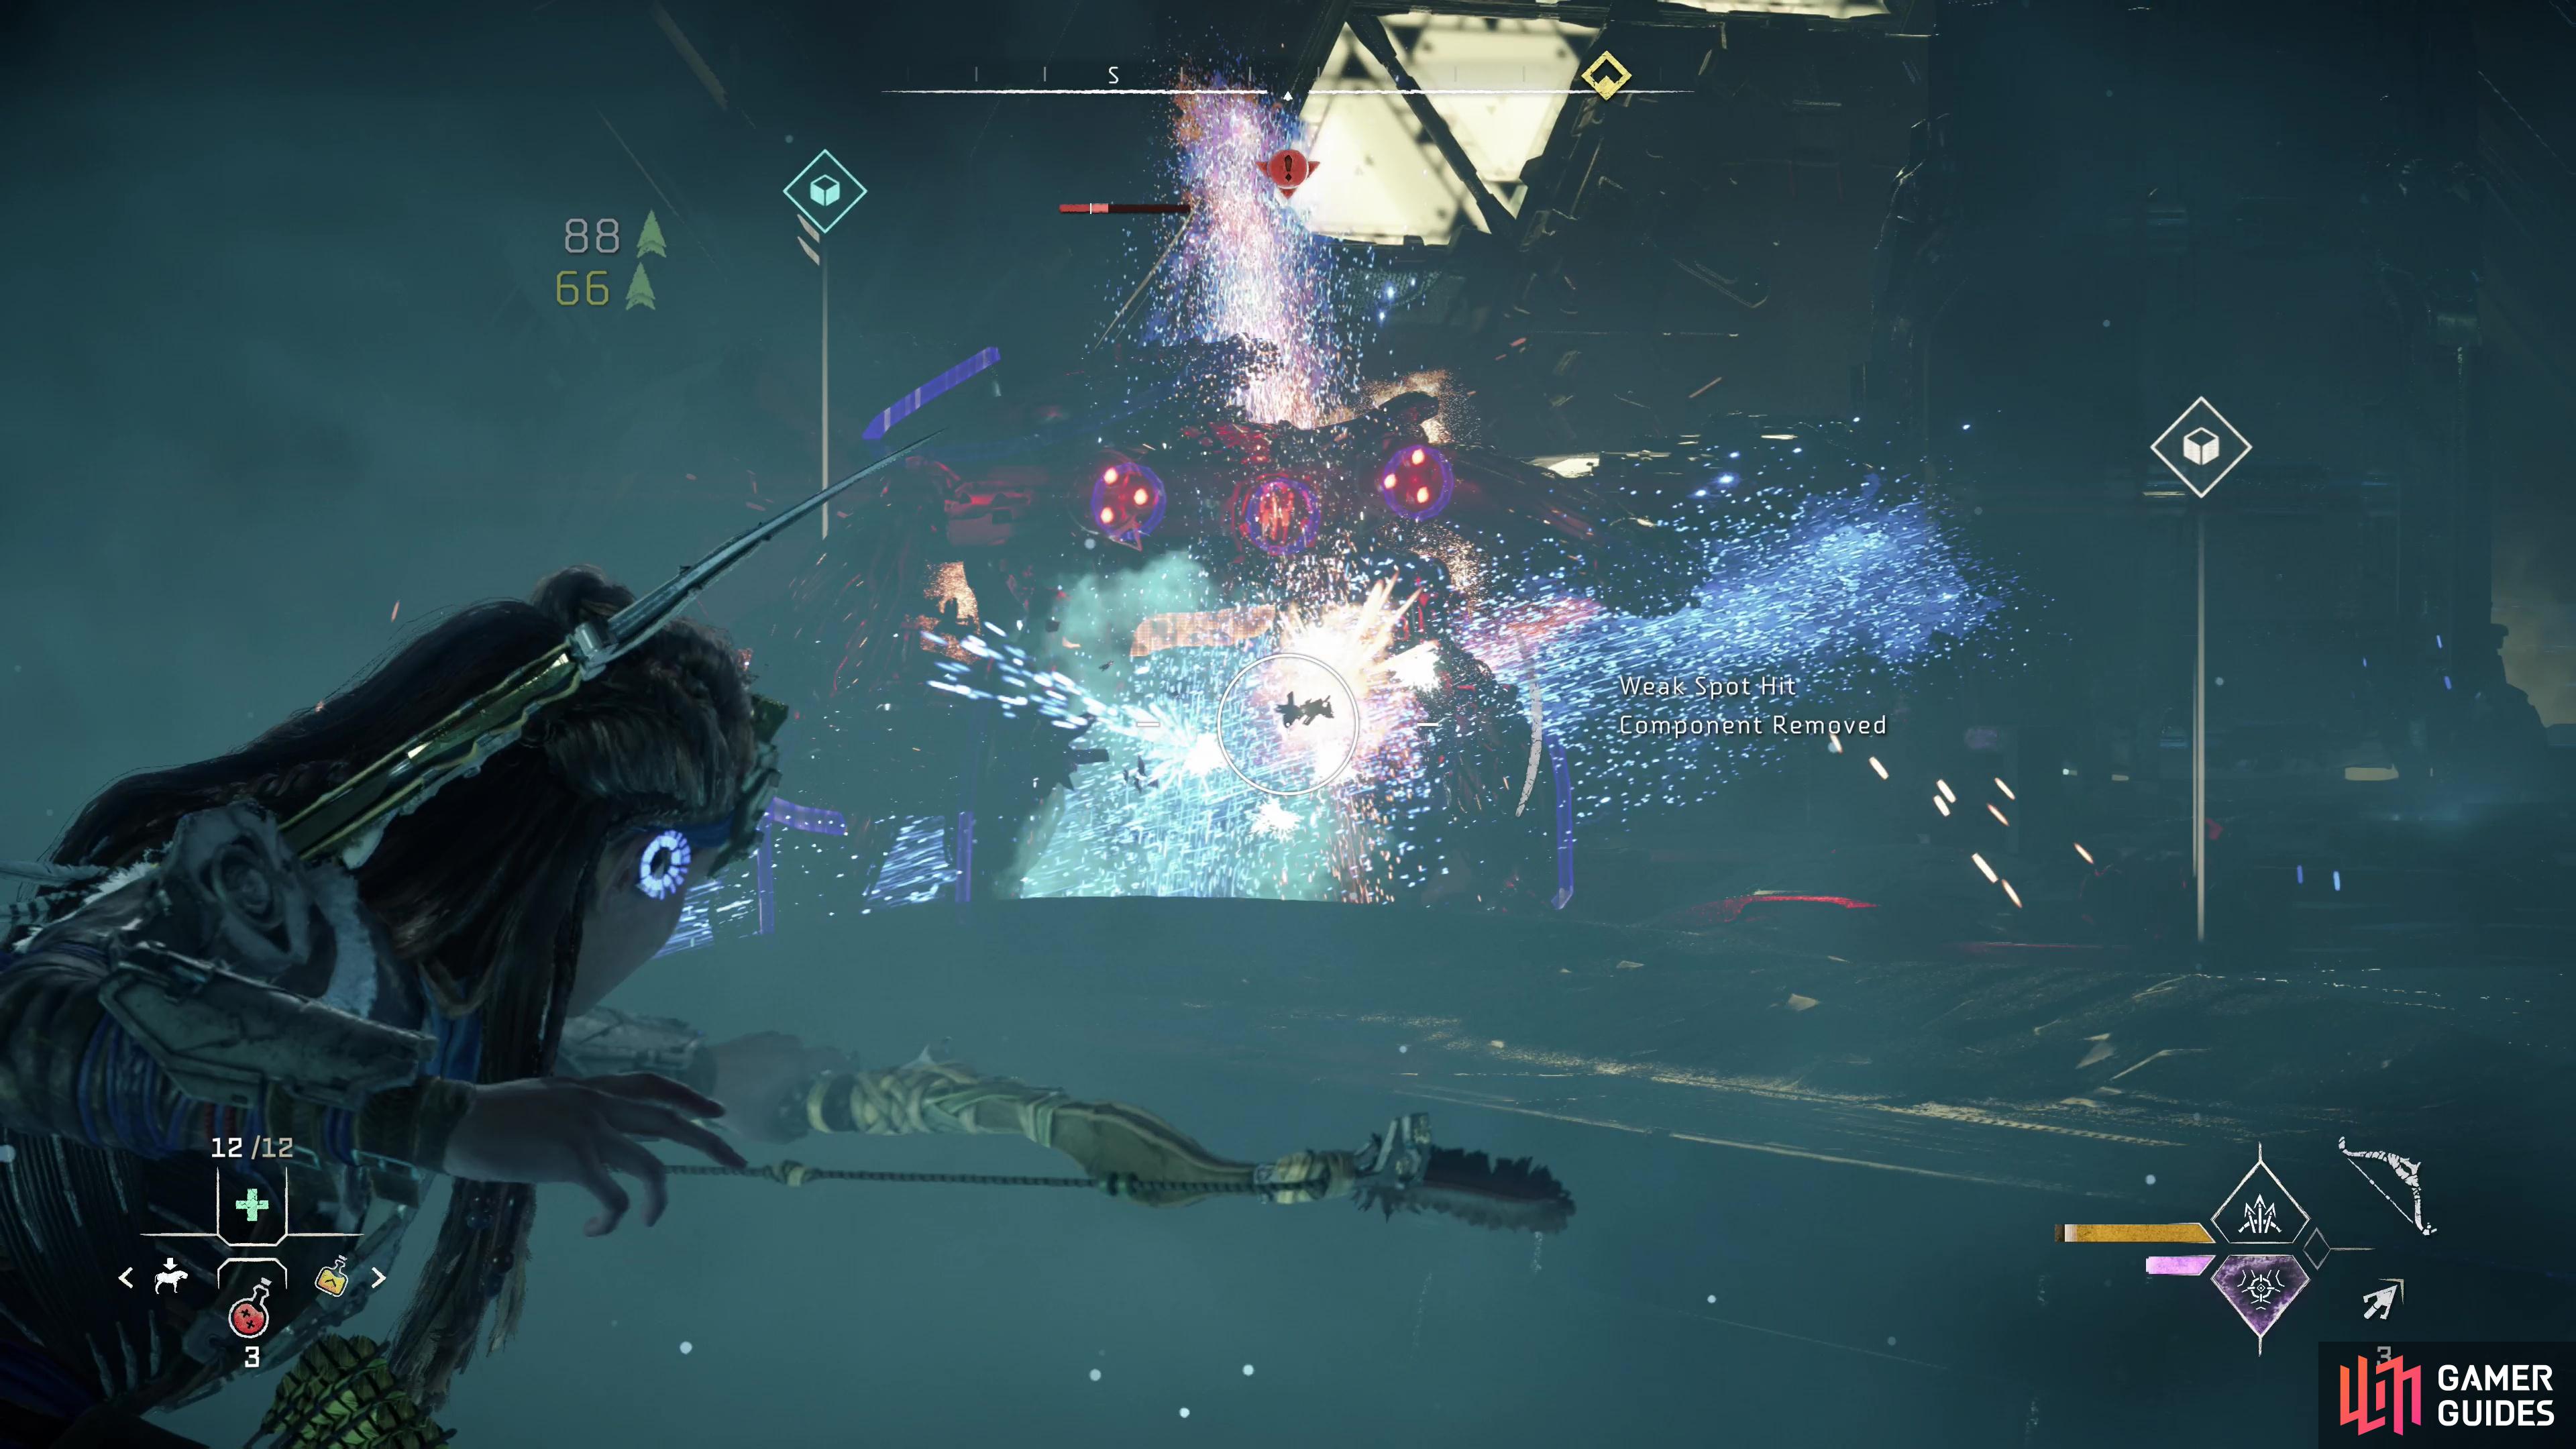 then concentrate on the isolated Shellwalker - stealth and hit and run tactics work well.